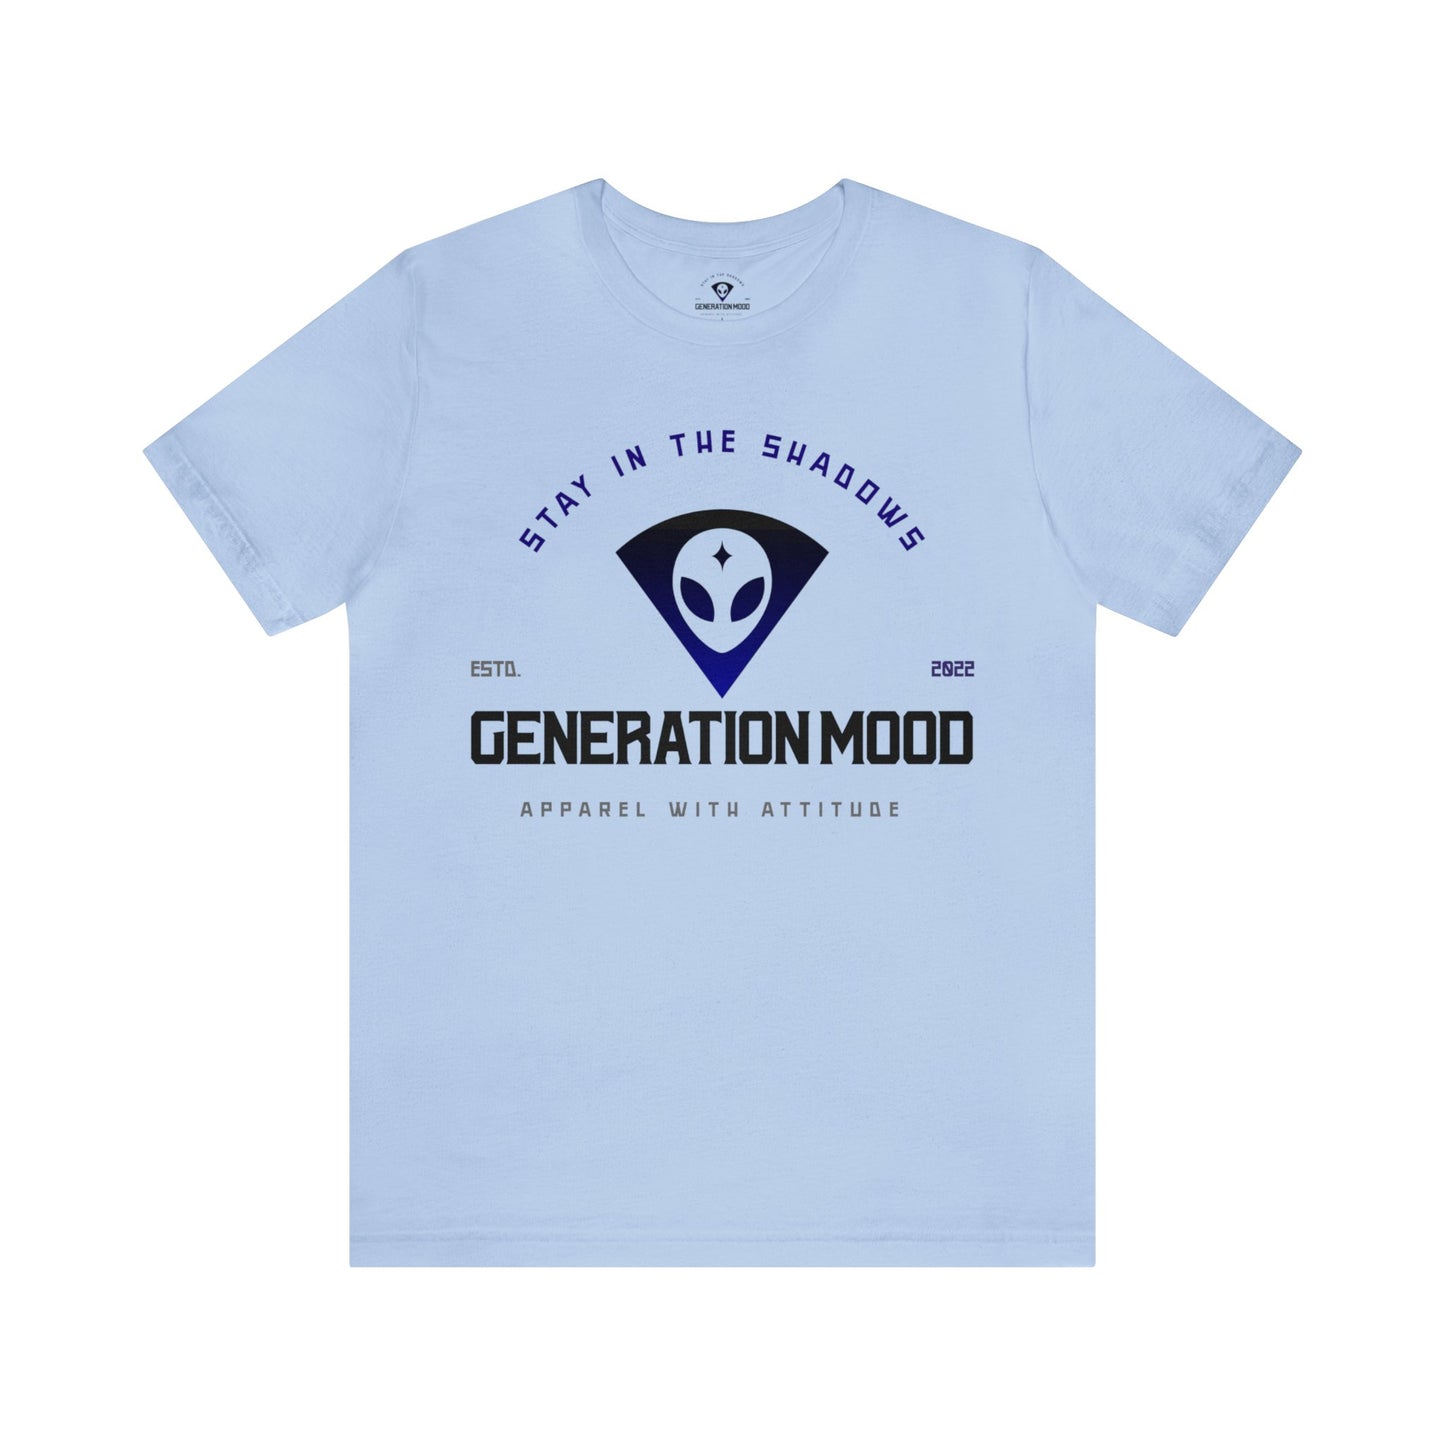 Are you ready to channel your inner cosmic wanderer? Our exclusive Generation Mood logo alien t-shirt combines nostalgia and a dash of intergalactic cool. Whether you are a believer in little beings or just love a good logo tee, this shirt is for you. In Lite Blue